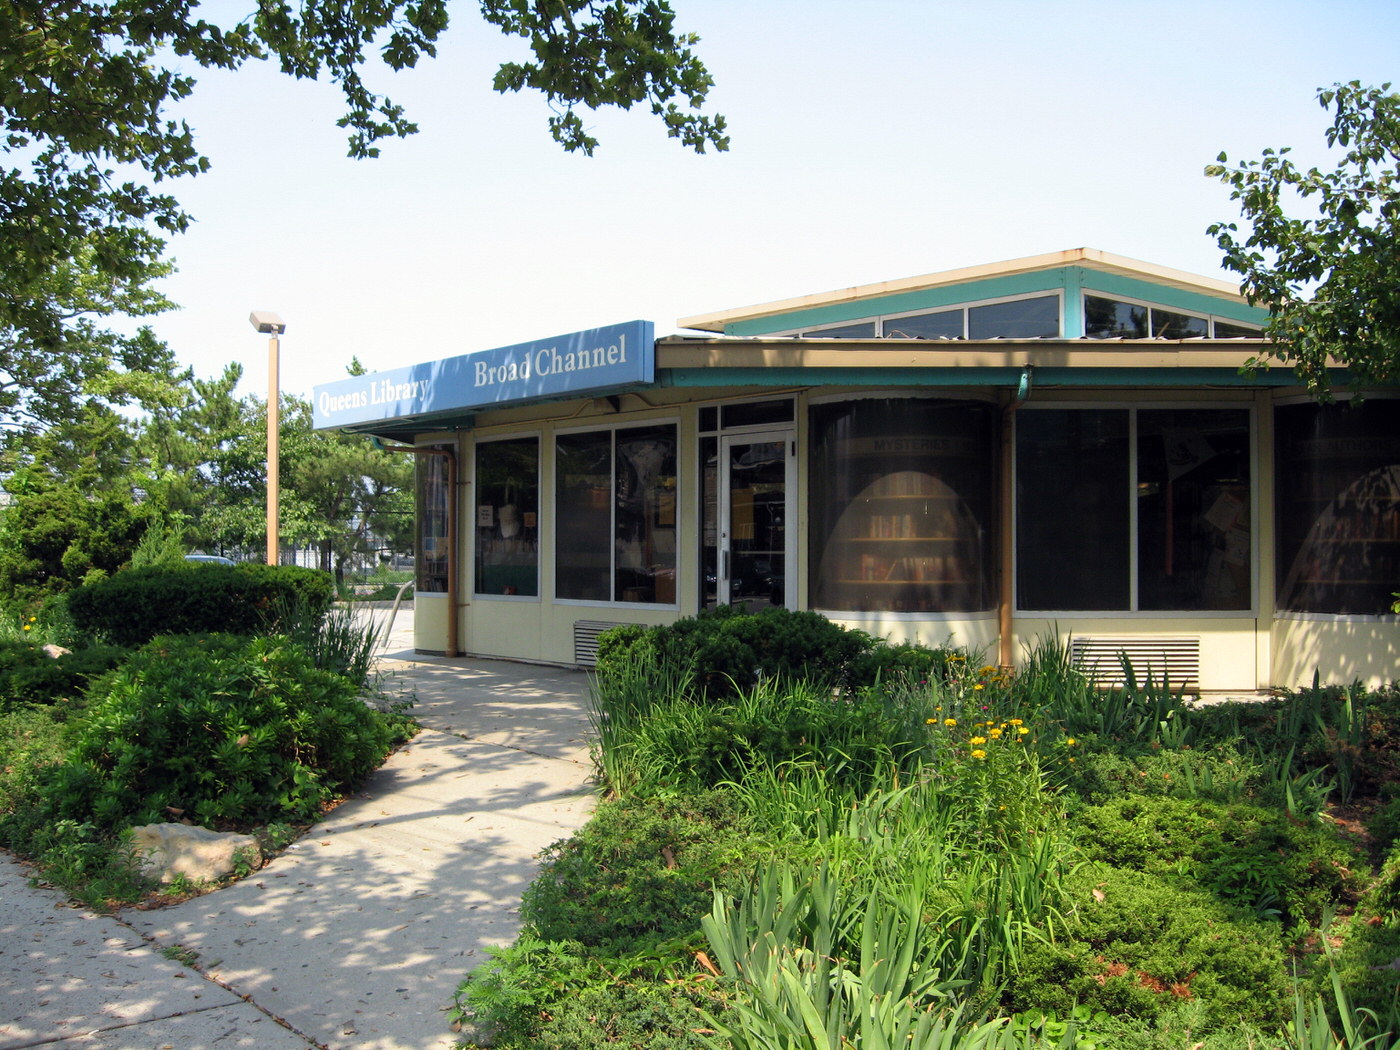 Queens Library, Broad Channel Branch, 2007.